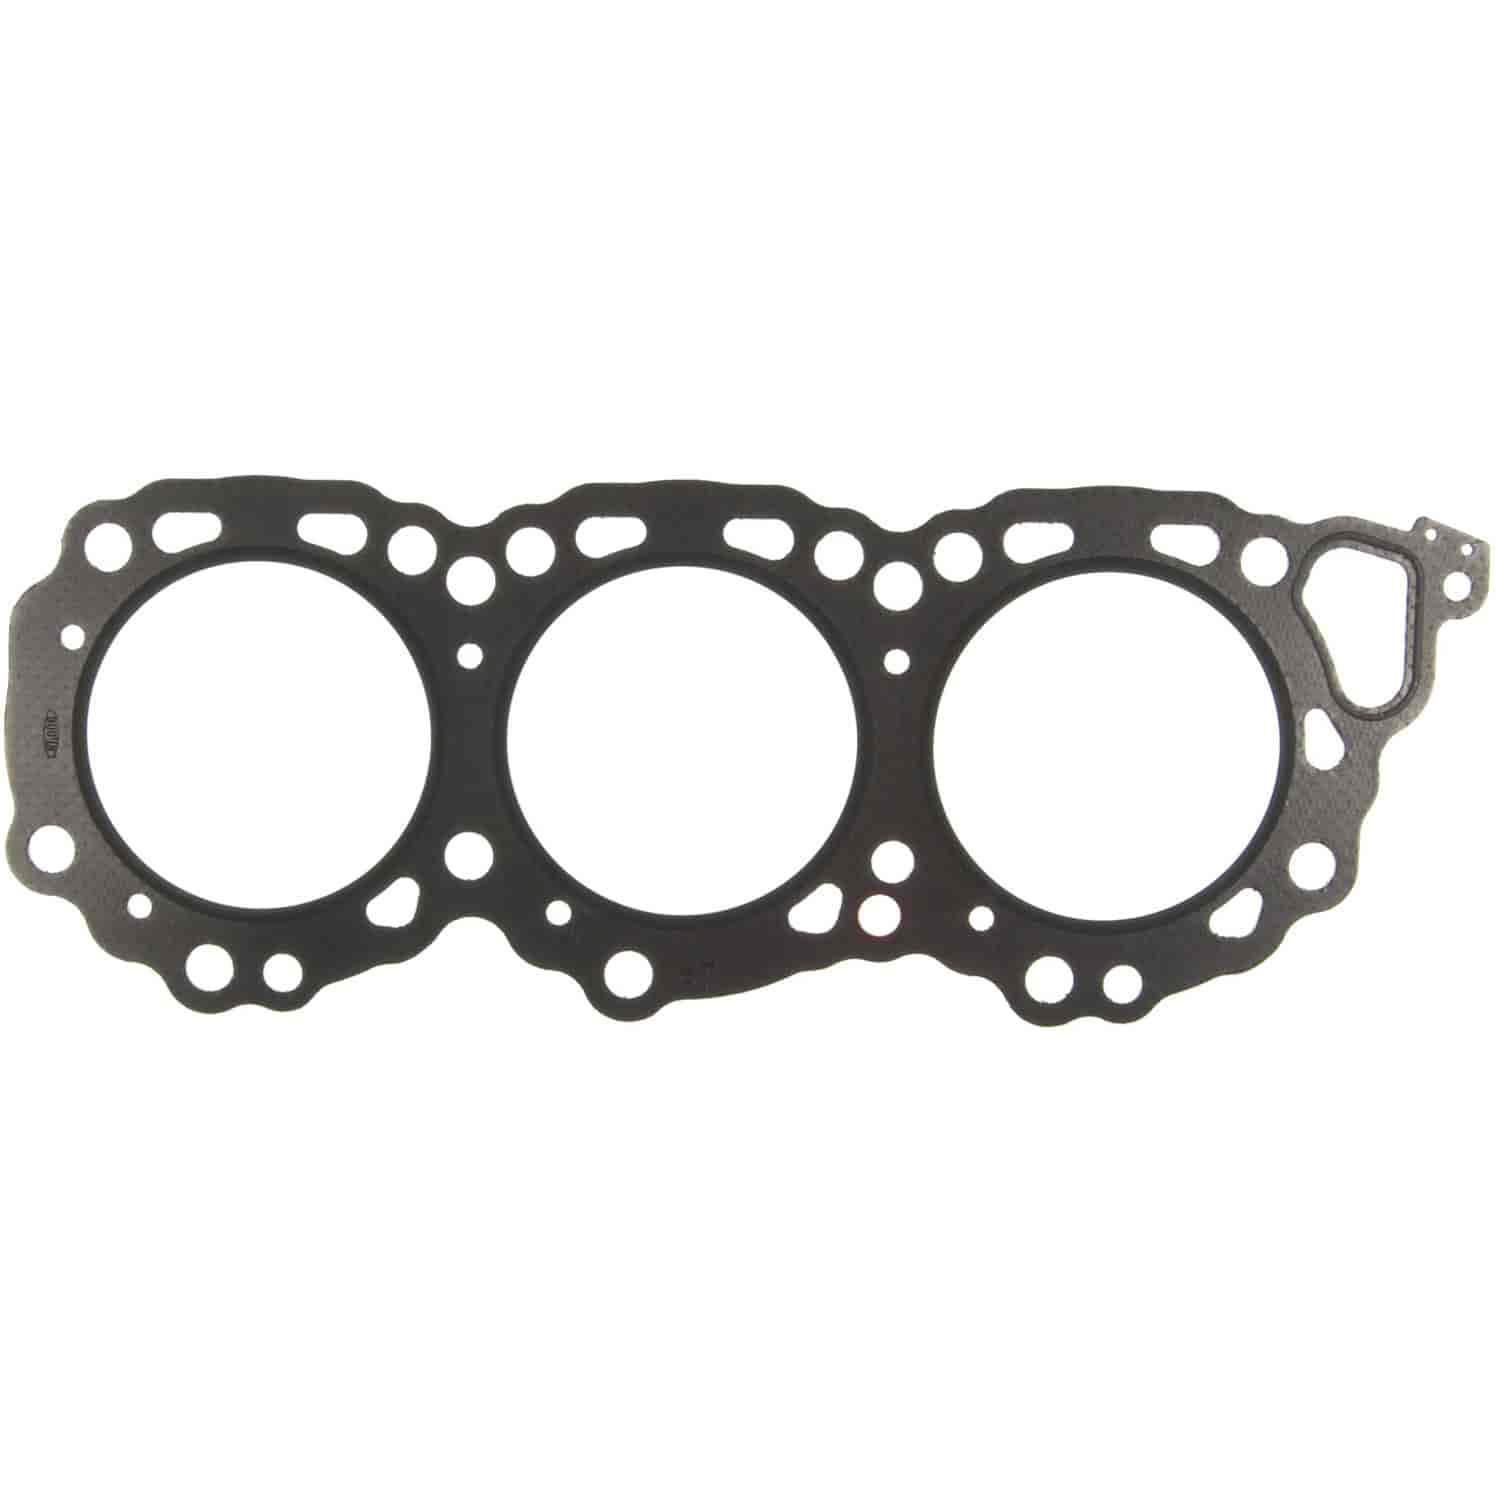 Cylinder Head Gasket for Nissan-Datsun Pickup w/2960cc VG30 6 Cyl.Eng. 87